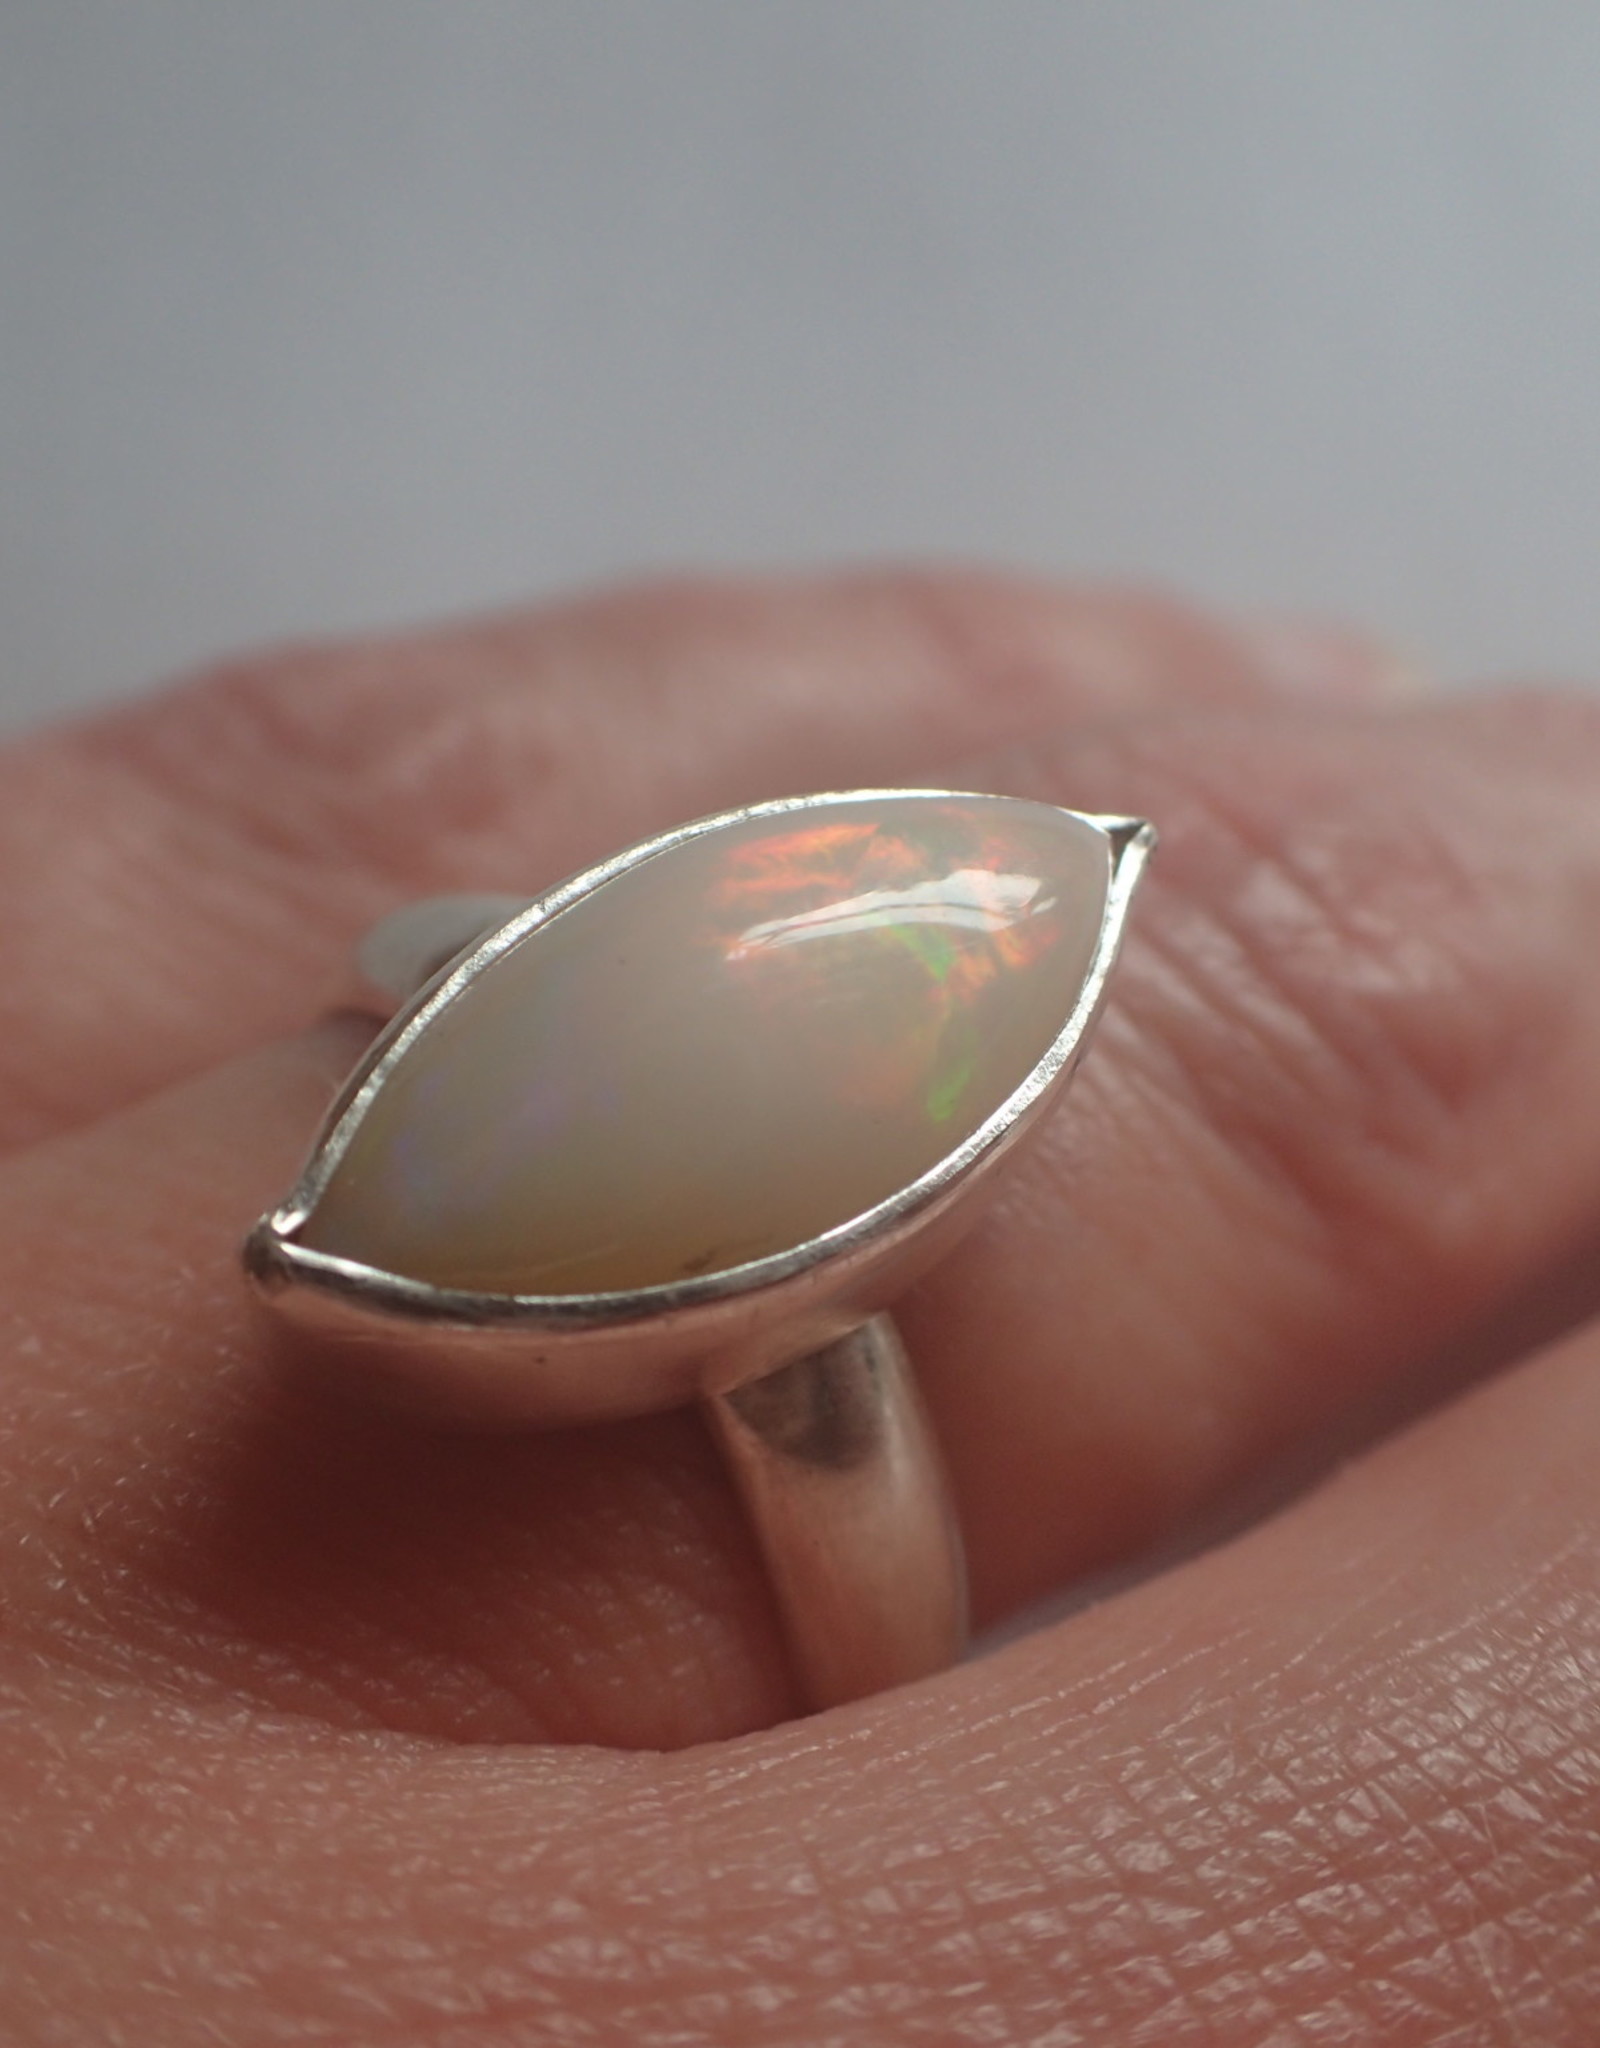 Lilly Parker Fire Opal, Sterling Silver Ring, Size 7.25